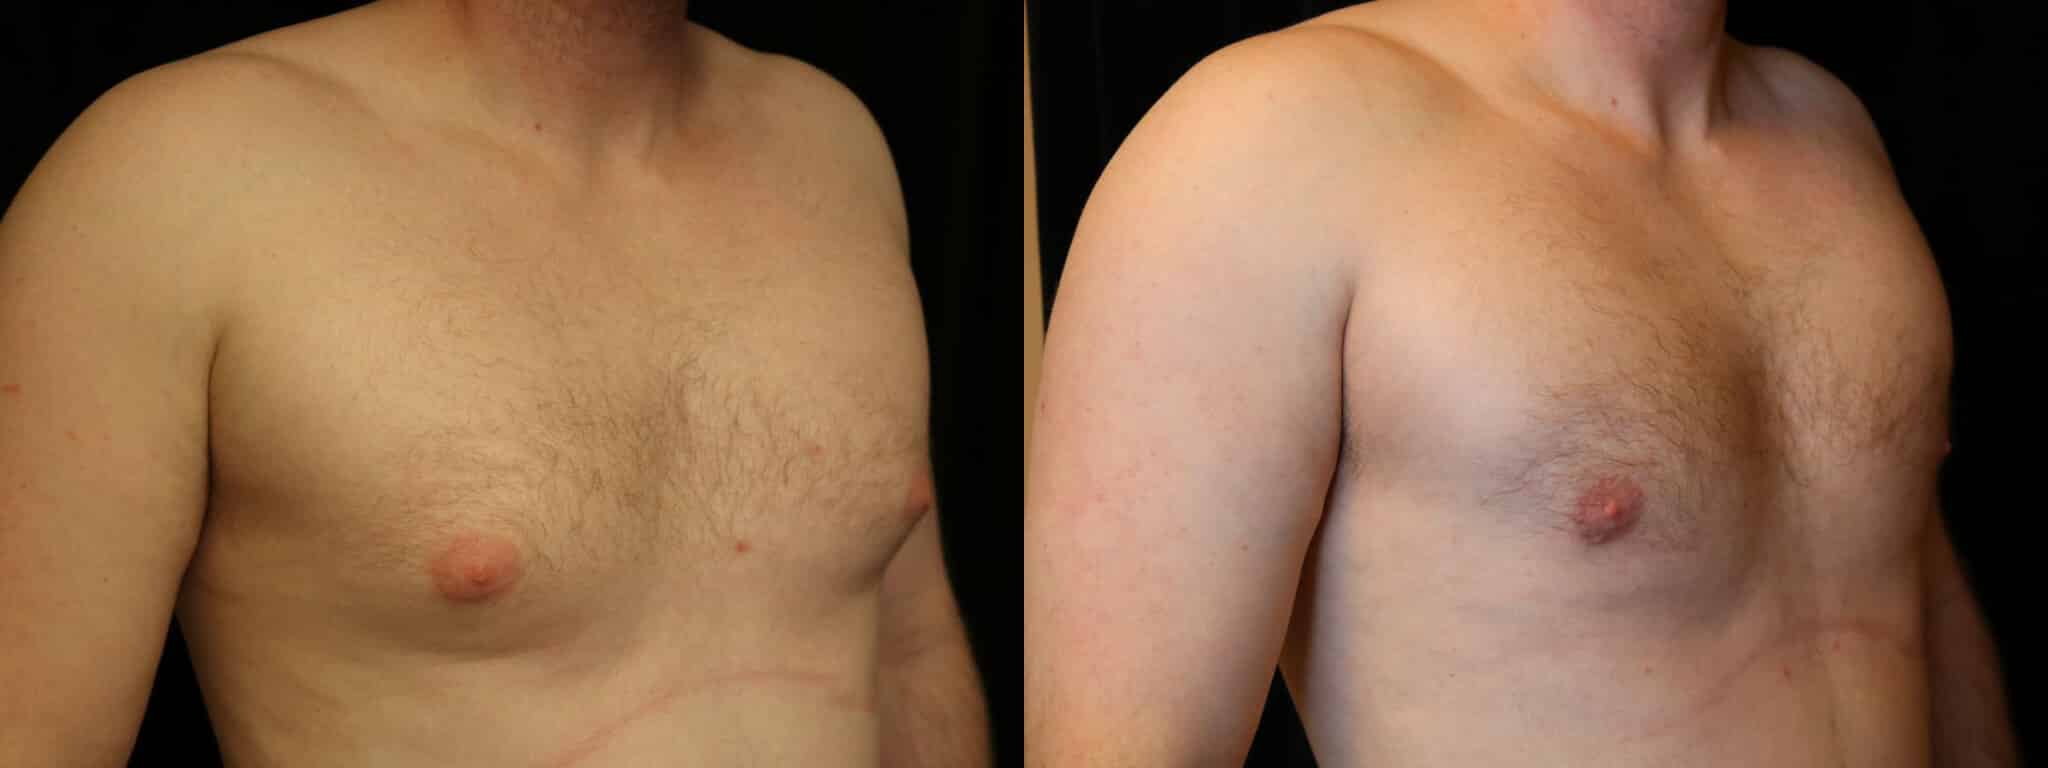 Gynecomastia Patient 18 Before & After Details